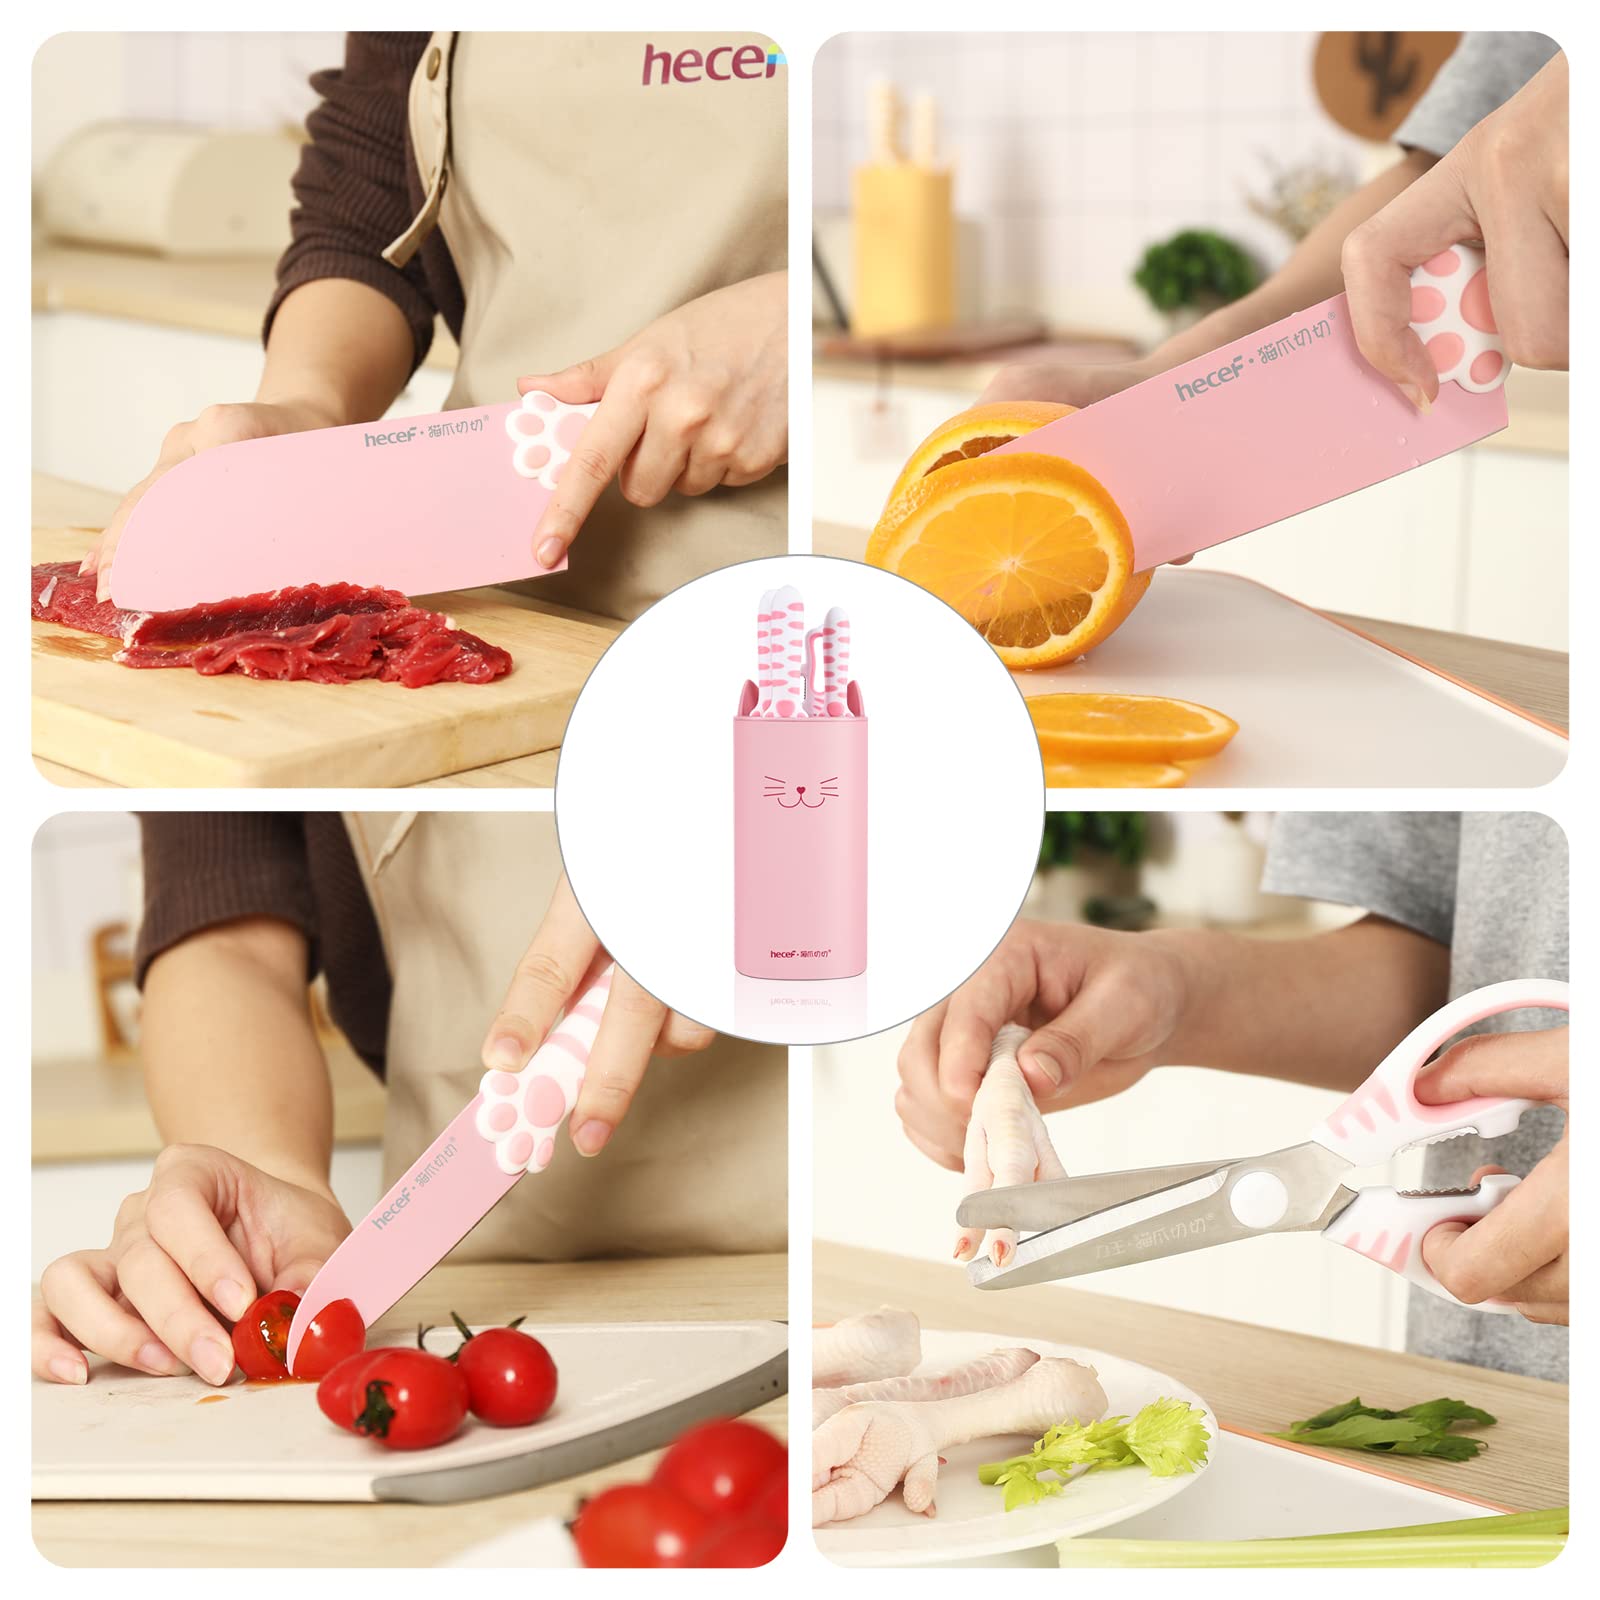 hecef Cute Kitchen Knife Set,5-piece Non-Stcik Knives Set with Detachable Block and Scissors,Sharp Kitchen Knives for Chopping, Slicing, Dicing and Cutting, Gift Housewarming Birthday (Pink)